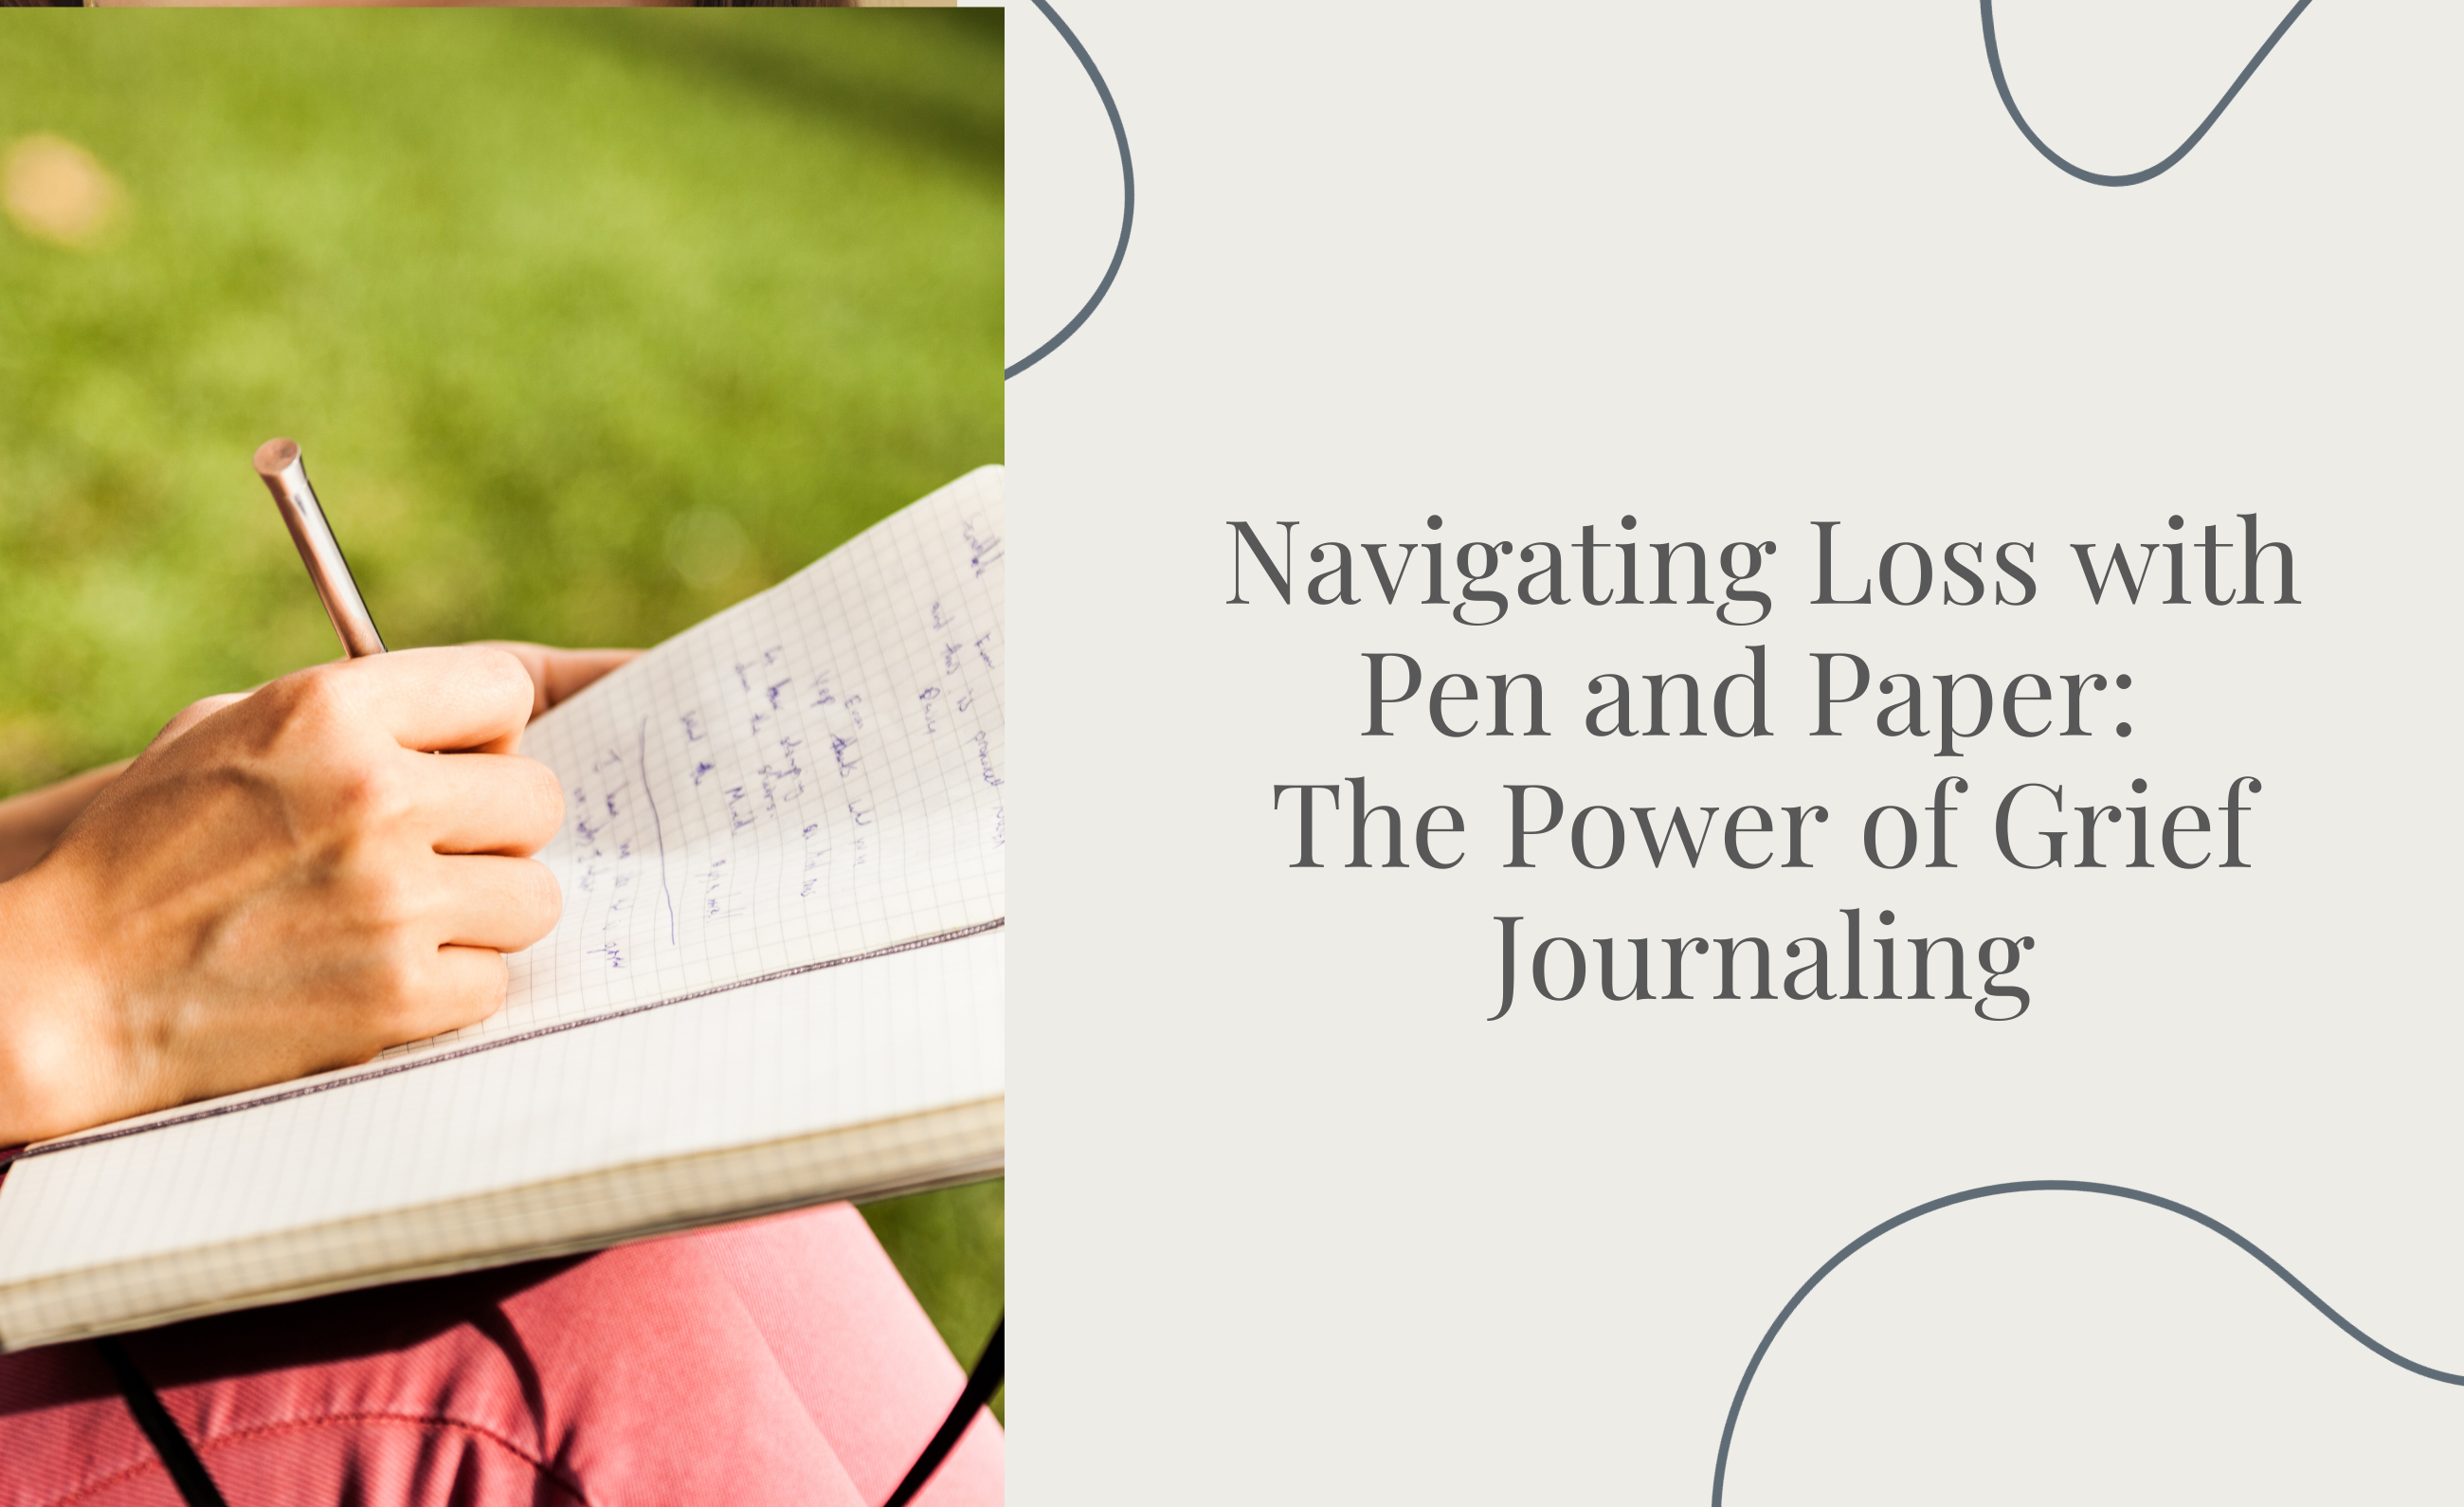 Navigating Loss with Pen and Paper: The Power of Grief Journaling